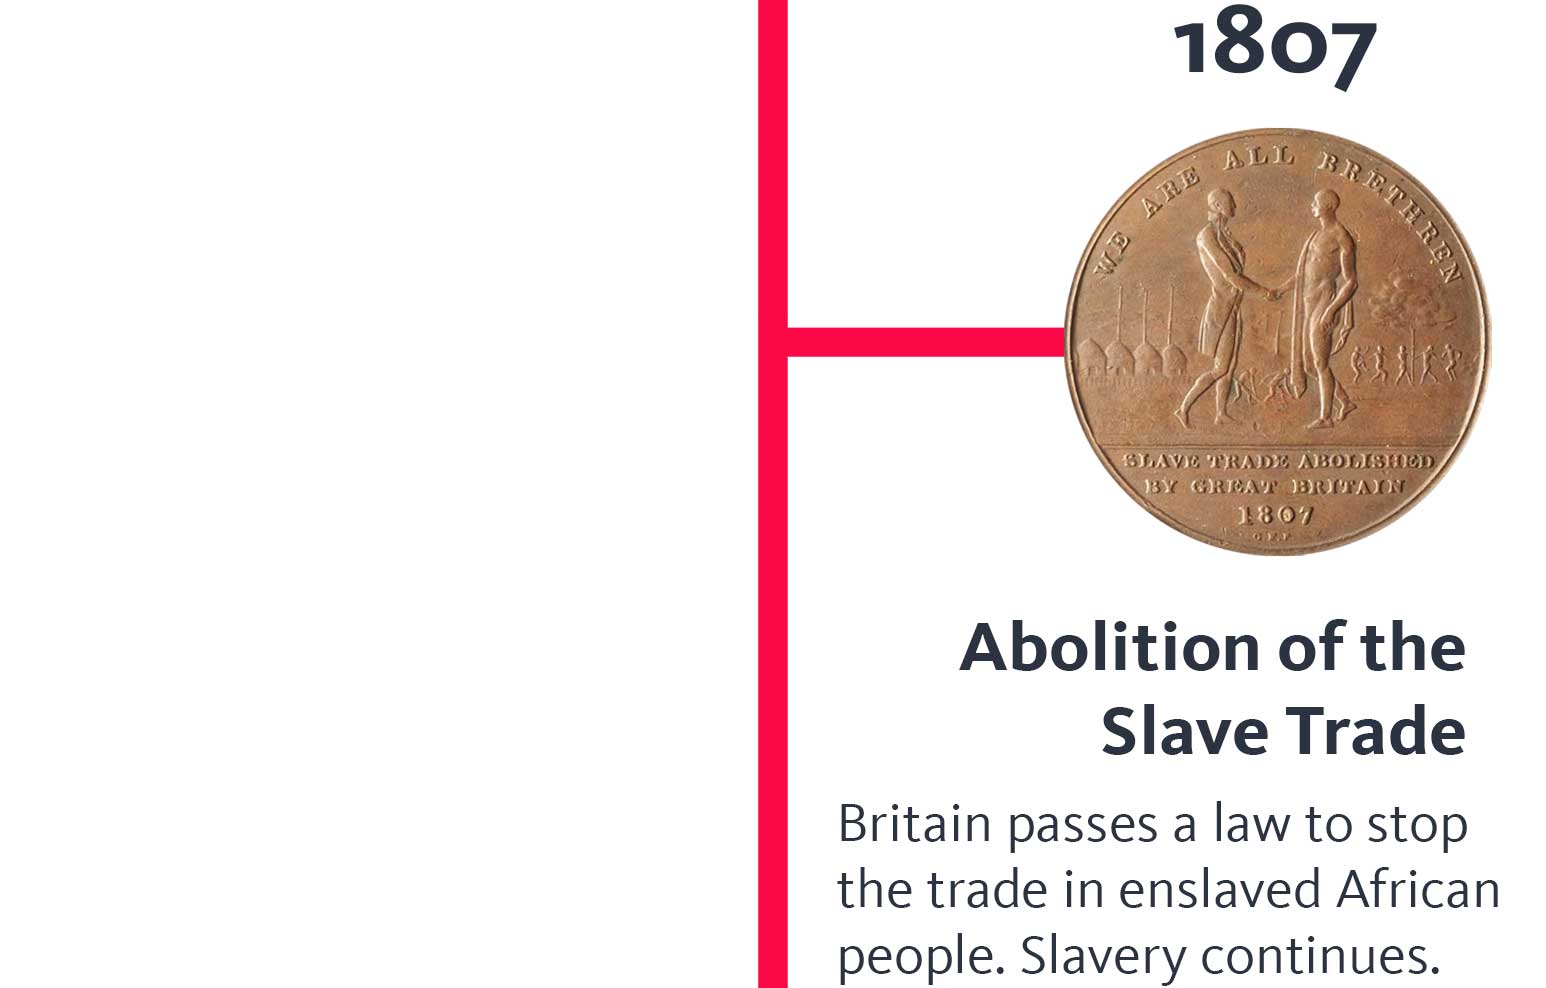 The year '1807' appears above a photo of a commemorative coin. A heading below says 'Abolition of the Slave Trade', and text below that says 'Britain passes a law to stop the trade in enslaved African people. Slavery continues.'.